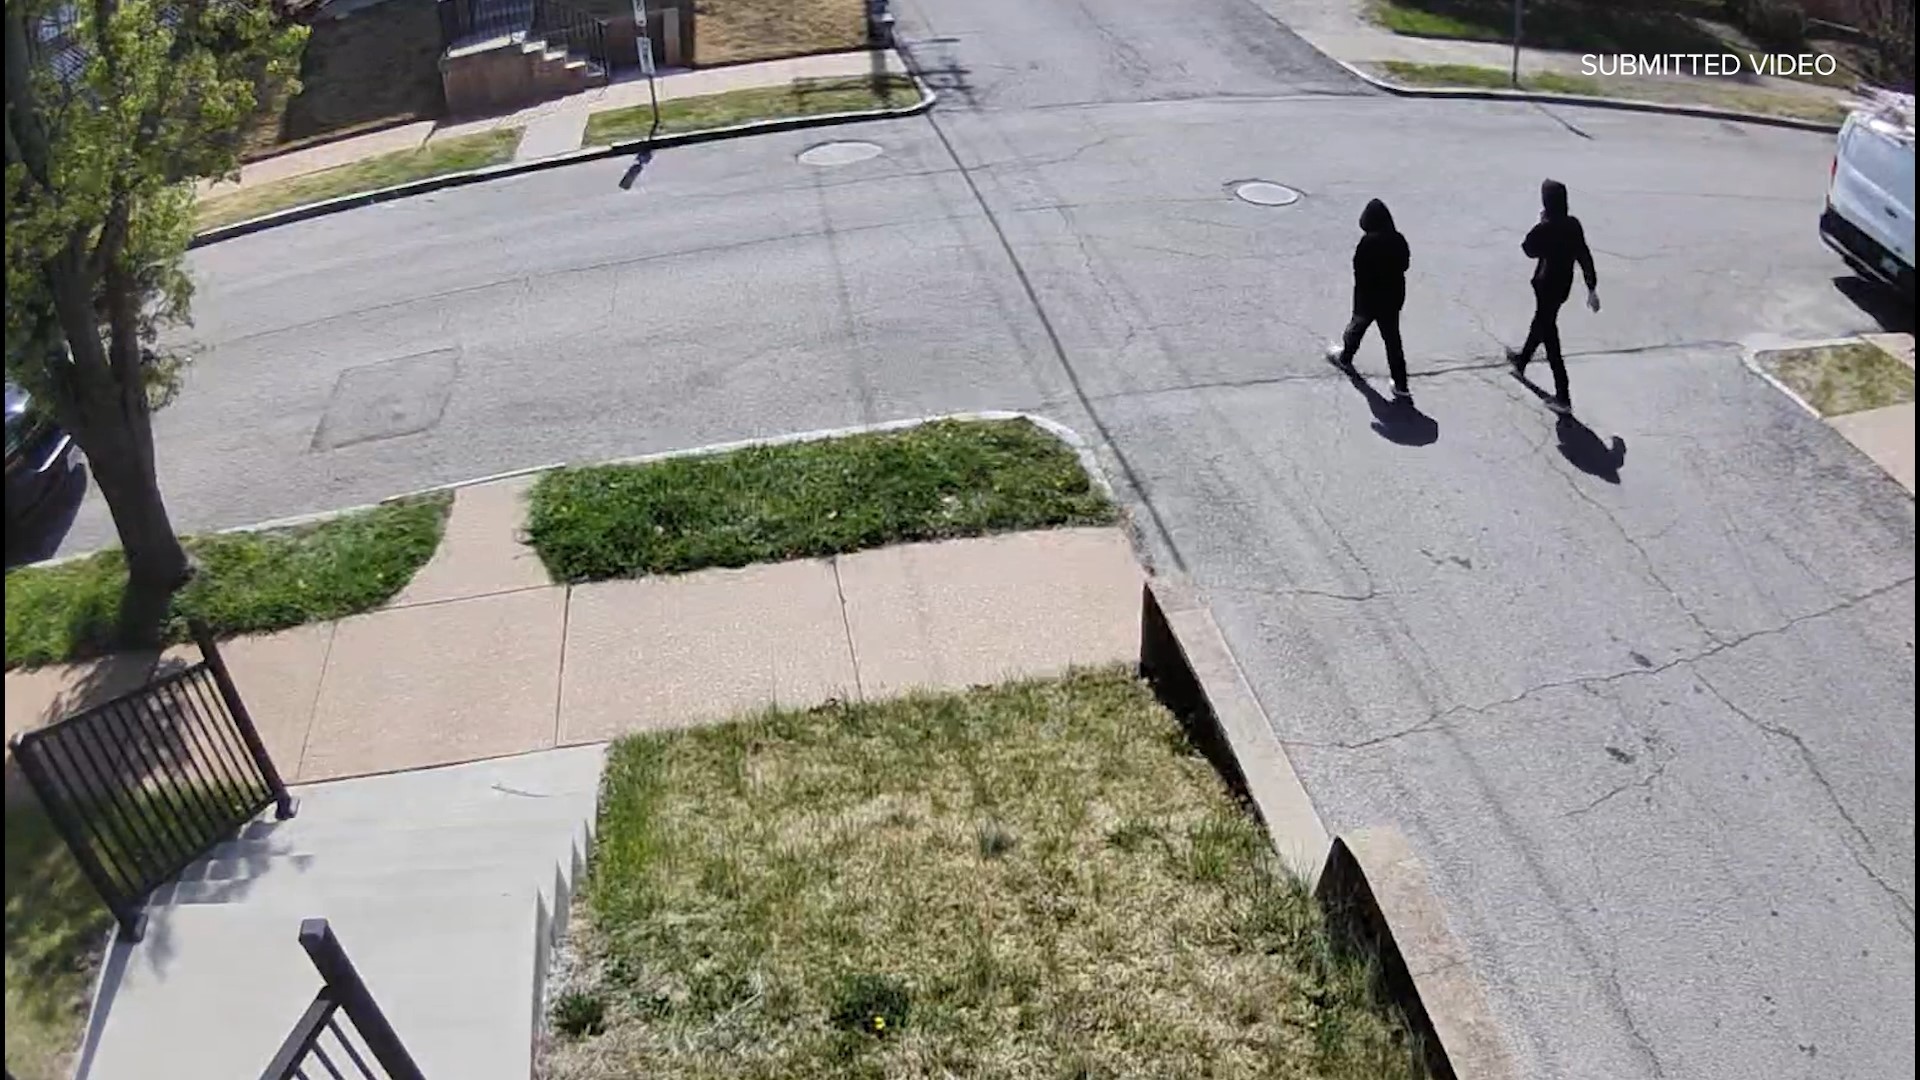 Two young runaway boys from Indiana attempted to carjack an elderly woman at gunpoint Saturday afternoon in south St. Louis. The victim was 82 years old.